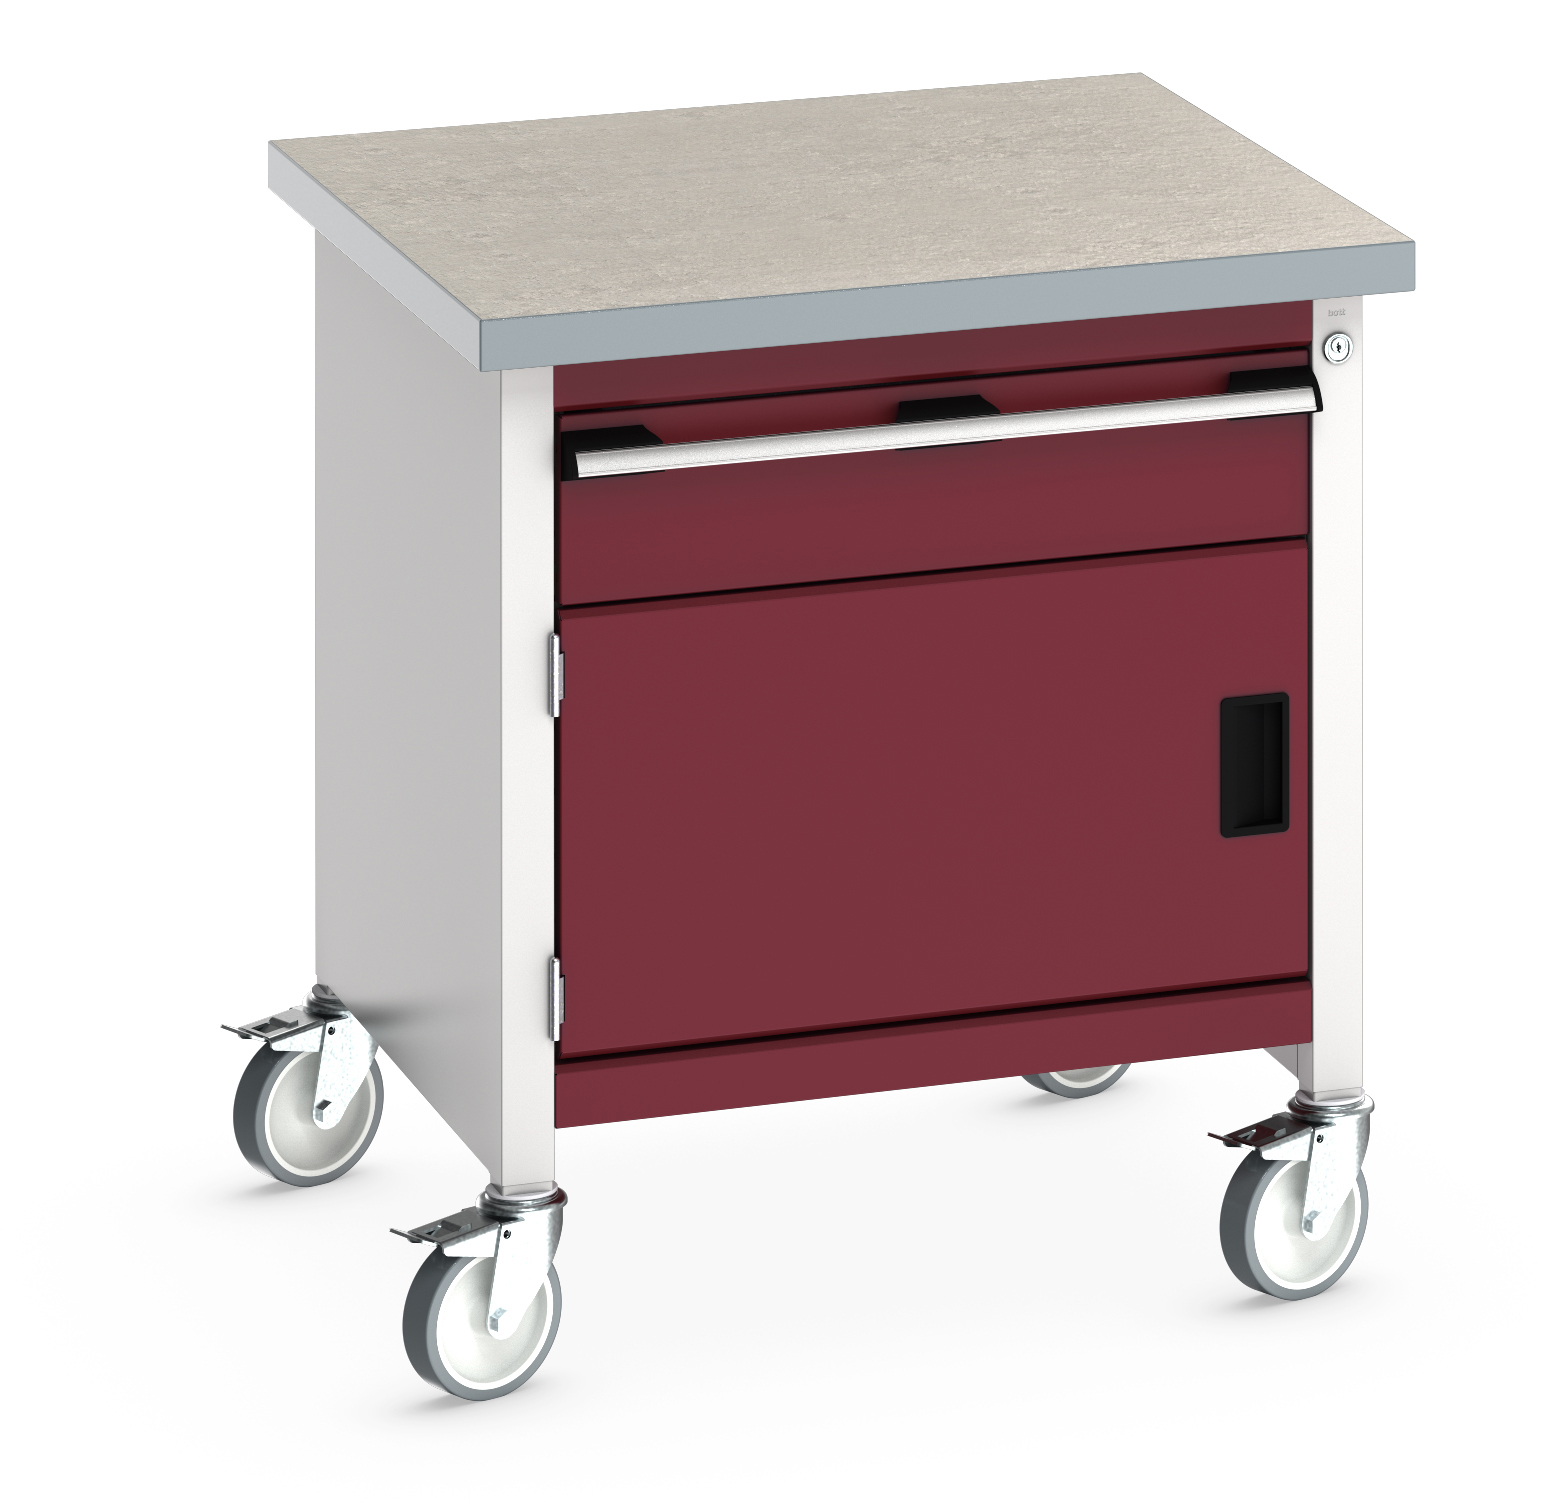 Bott Cubio Mobile Storage Bench With 1 Drawer - Full Cupboard - 41002090.24V